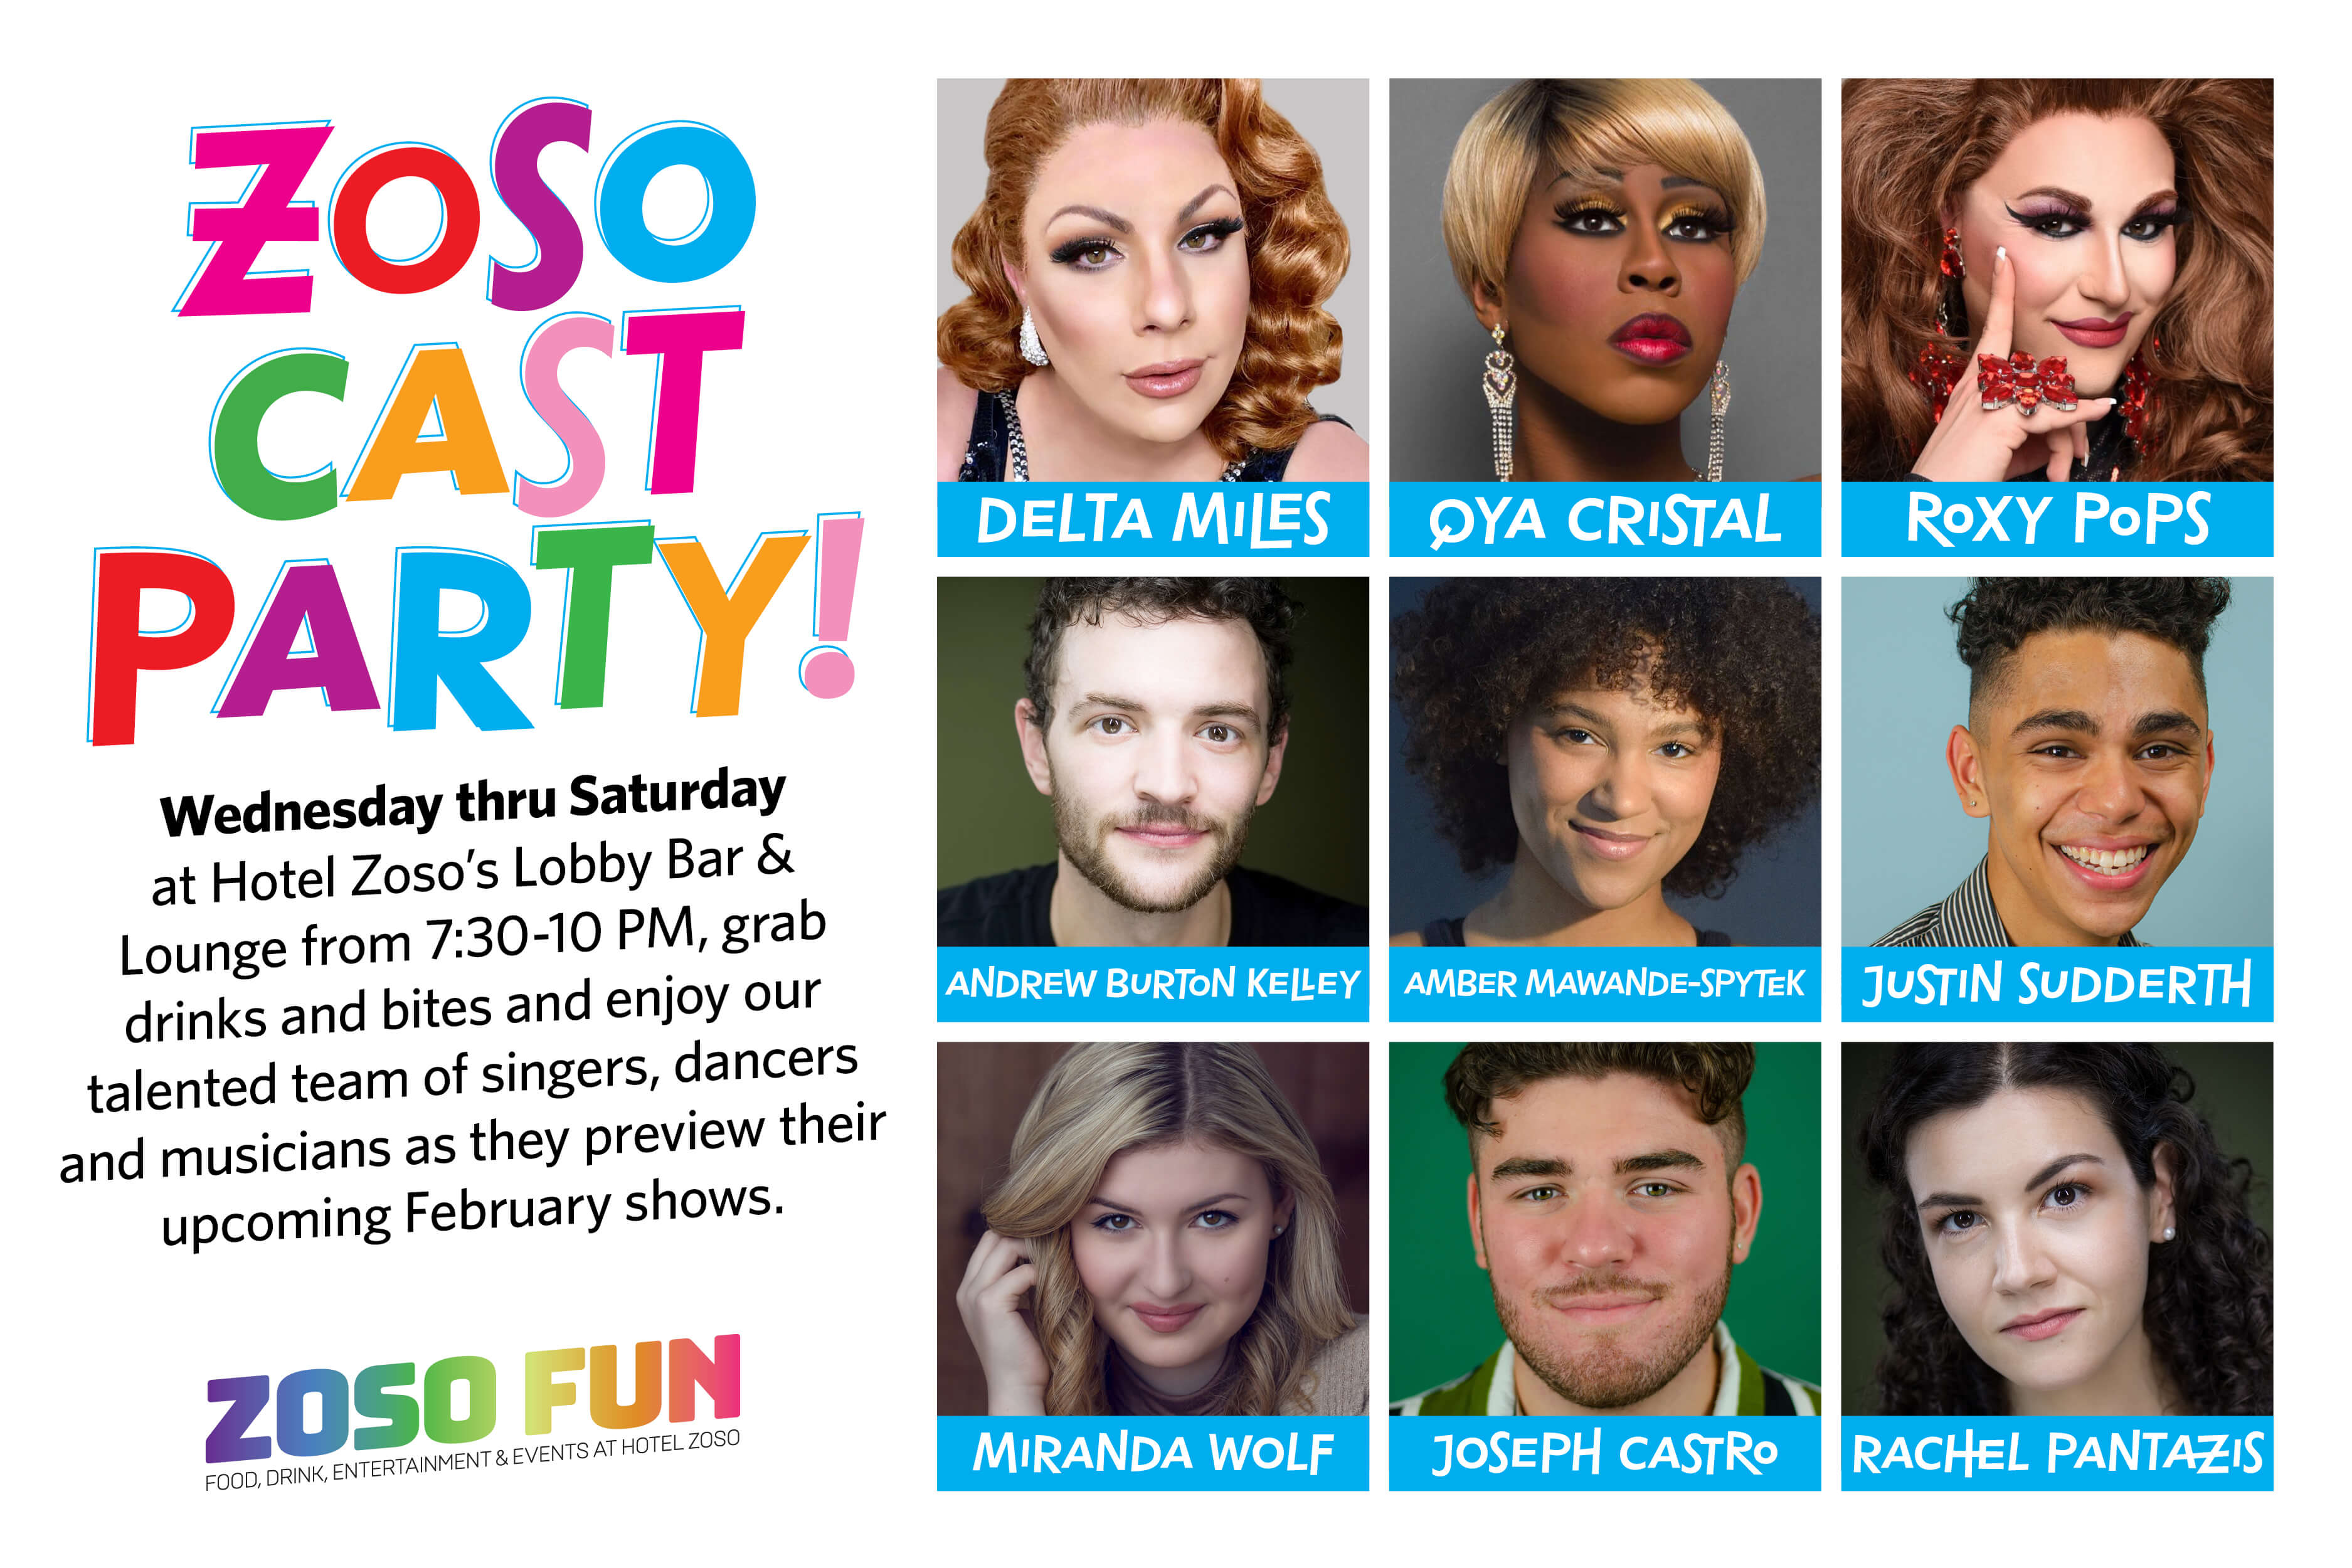 zoso cast party!